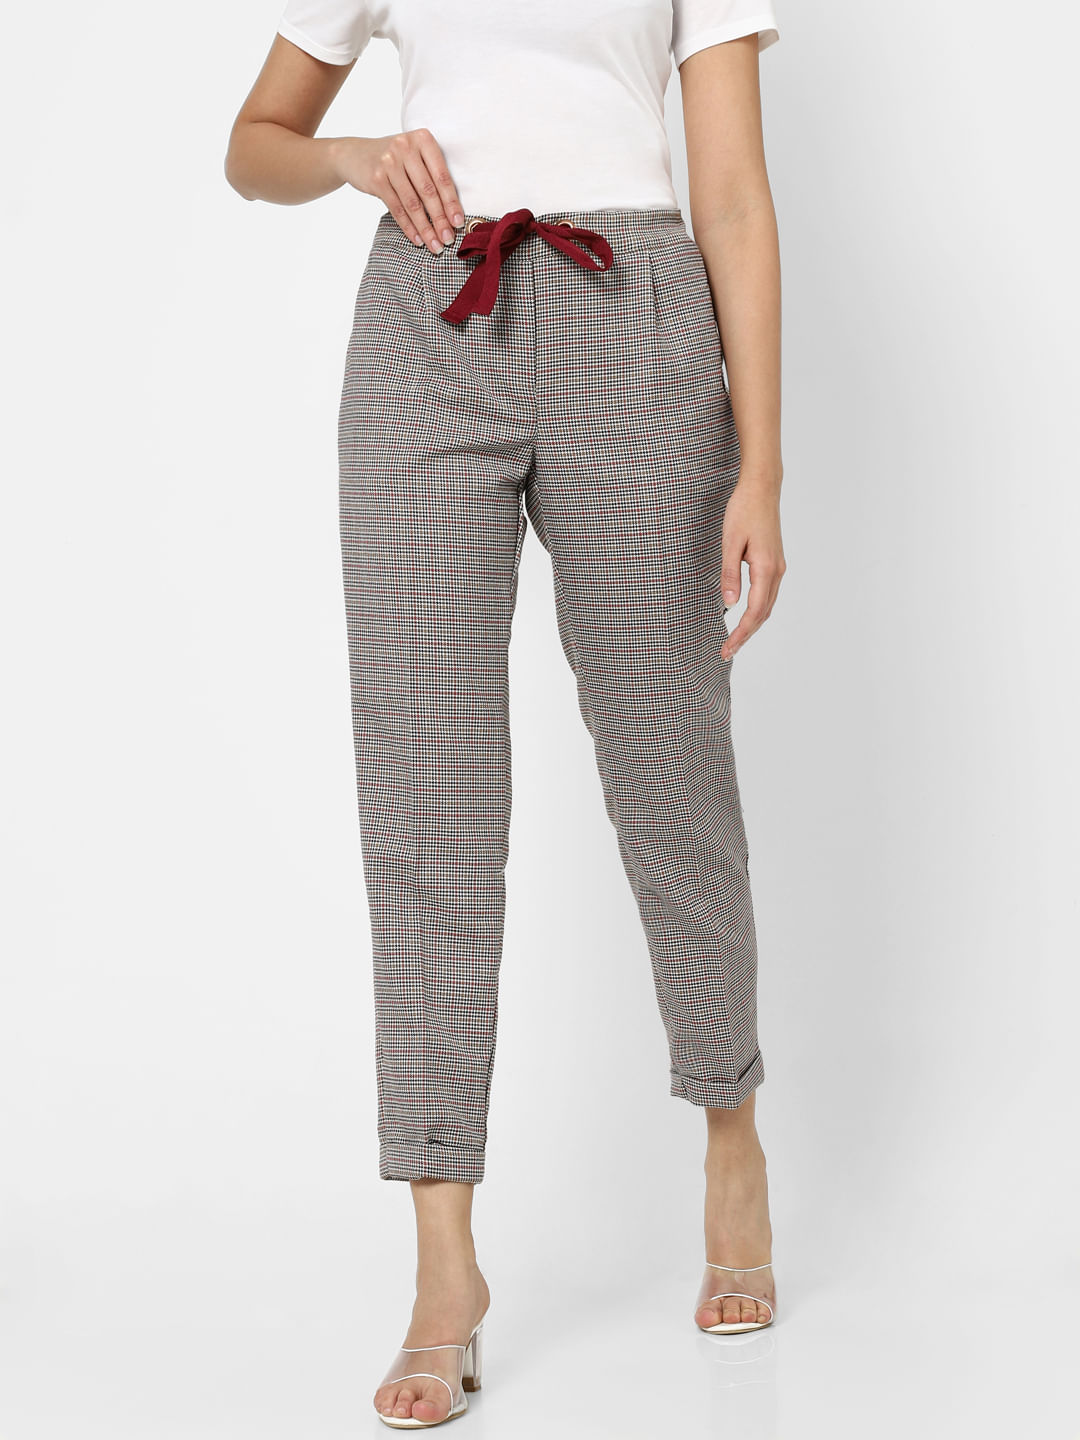 Checkered Trousers for Women | Shopee Philippines